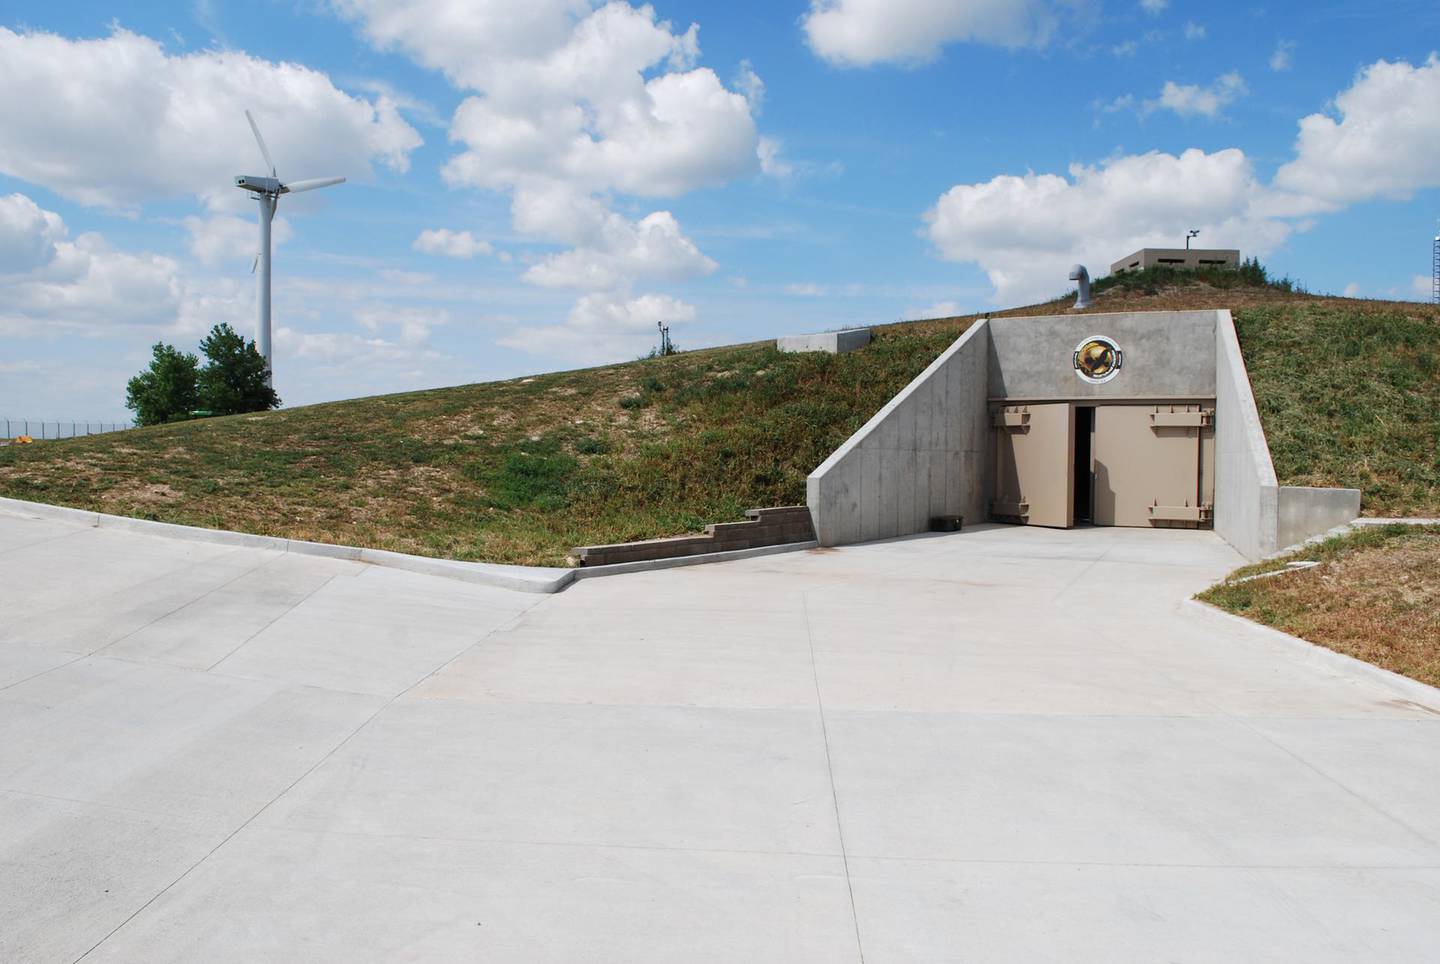 The entrance to the existing luxury bunker, with its wind turbine on the left. Courtesy: Survival Condo Project